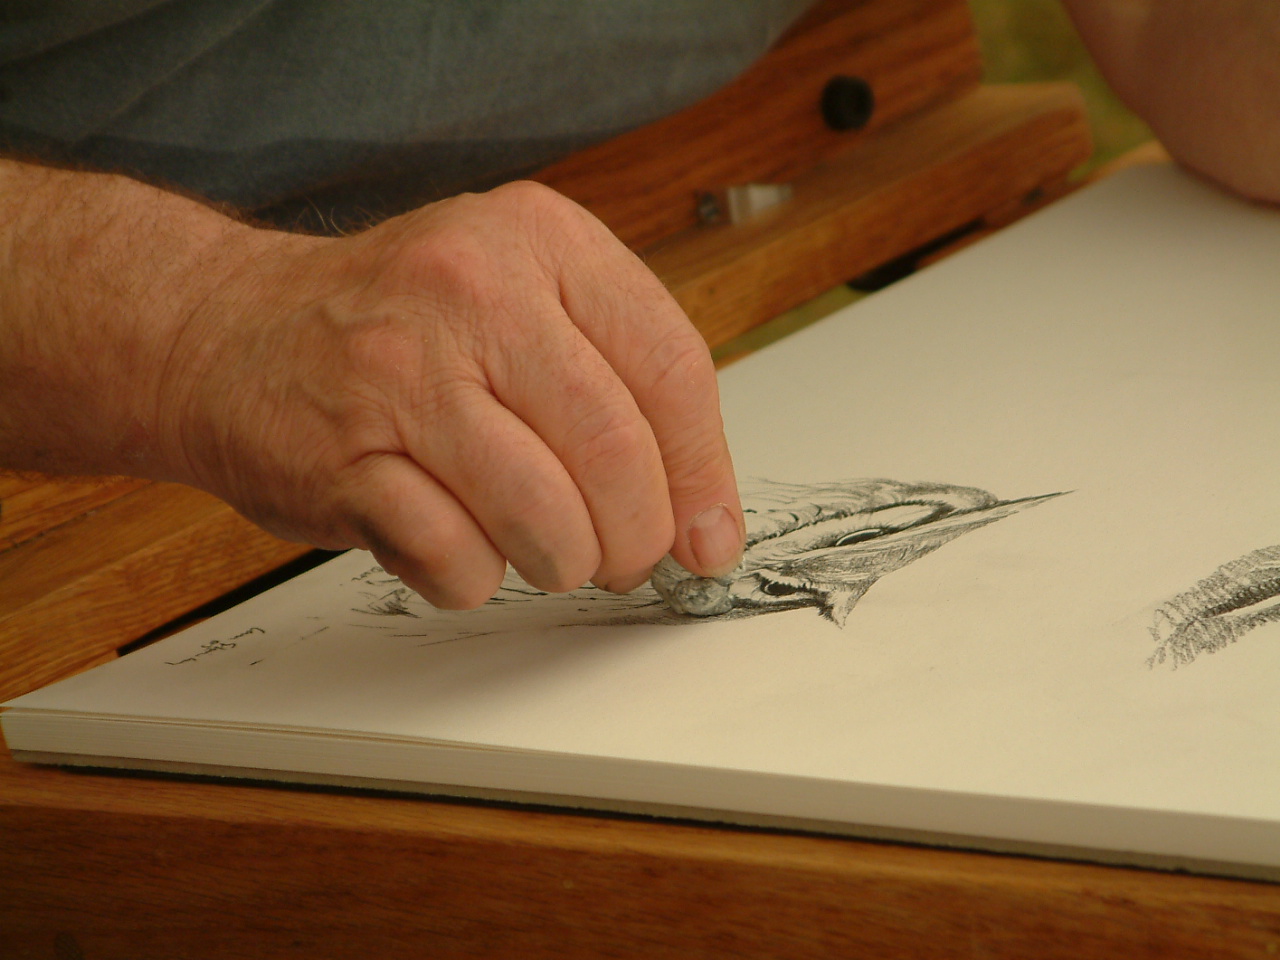 A person works on a drawing of an owl.